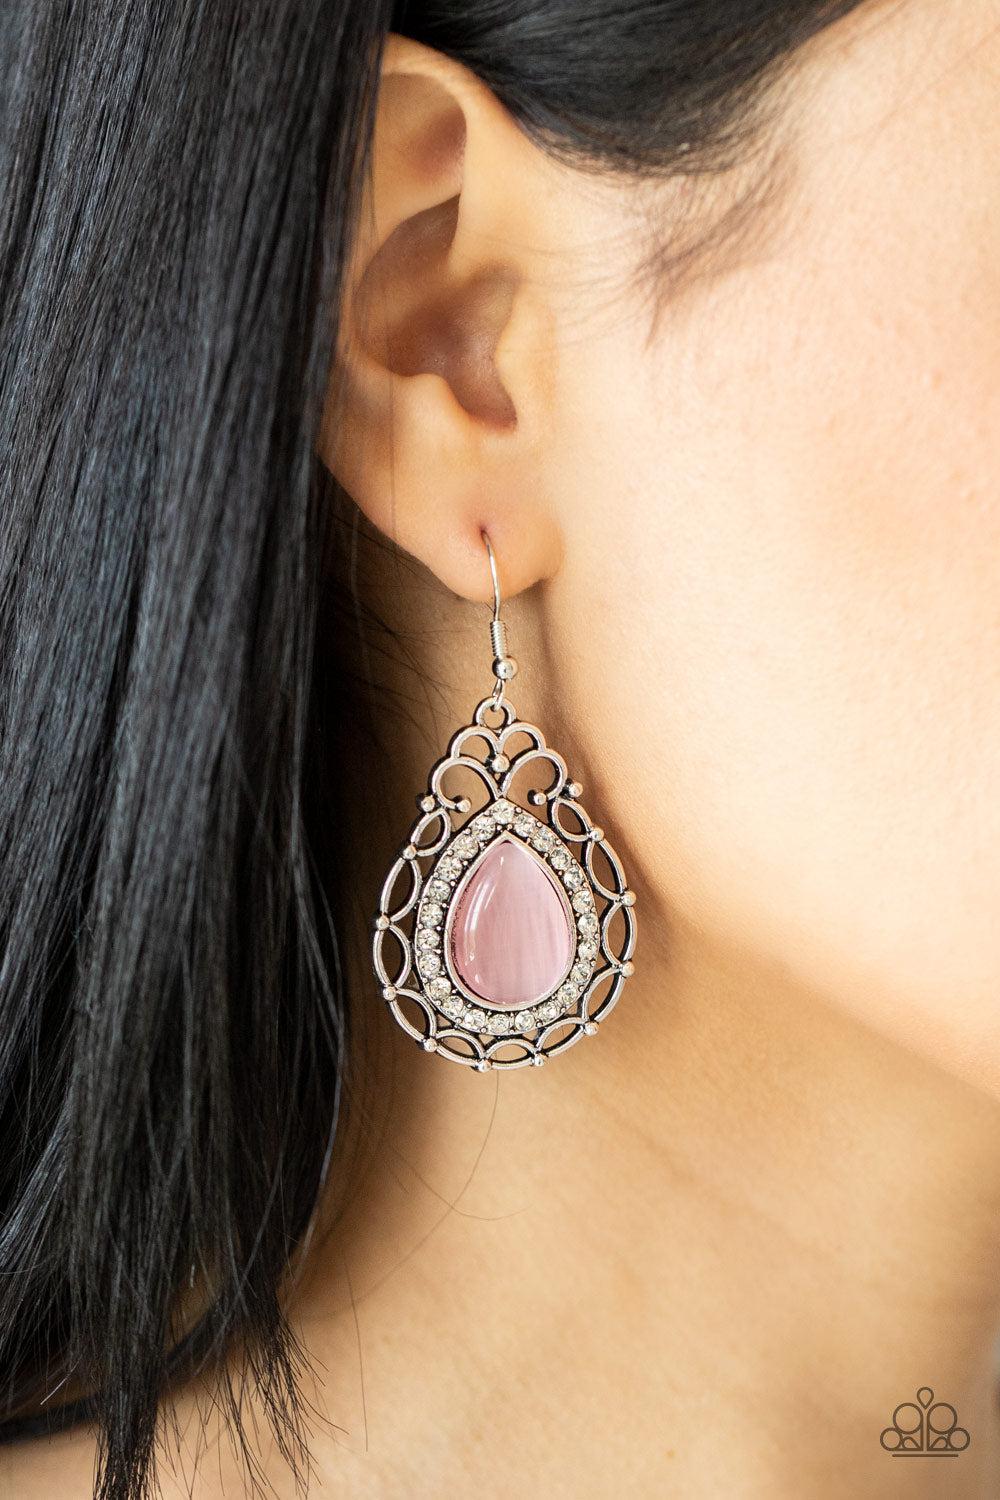 Endlessly Enchanting Pink Cat&#39;s Eye Stone Earrings - Paparazzi Accessories-on model - CarasShop.com - $5 Jewelry by Cara Jewels